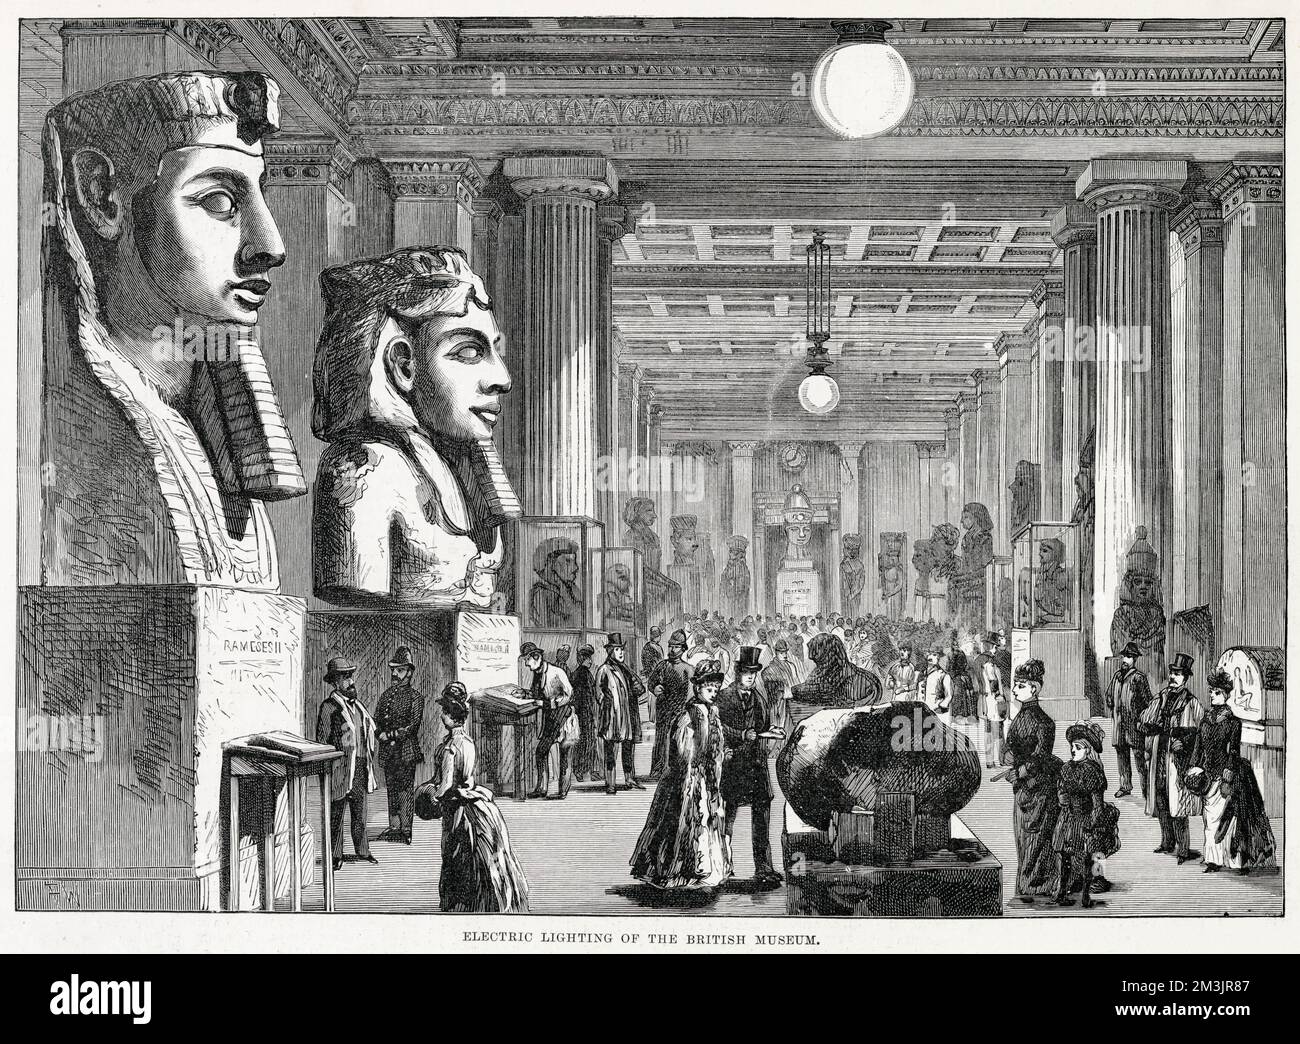 British Museum interior of the Egyptian gallery from 1890. Electric lights enabling the museum to be opened to the public in the evenings.     Date: 1890 Stock Photo